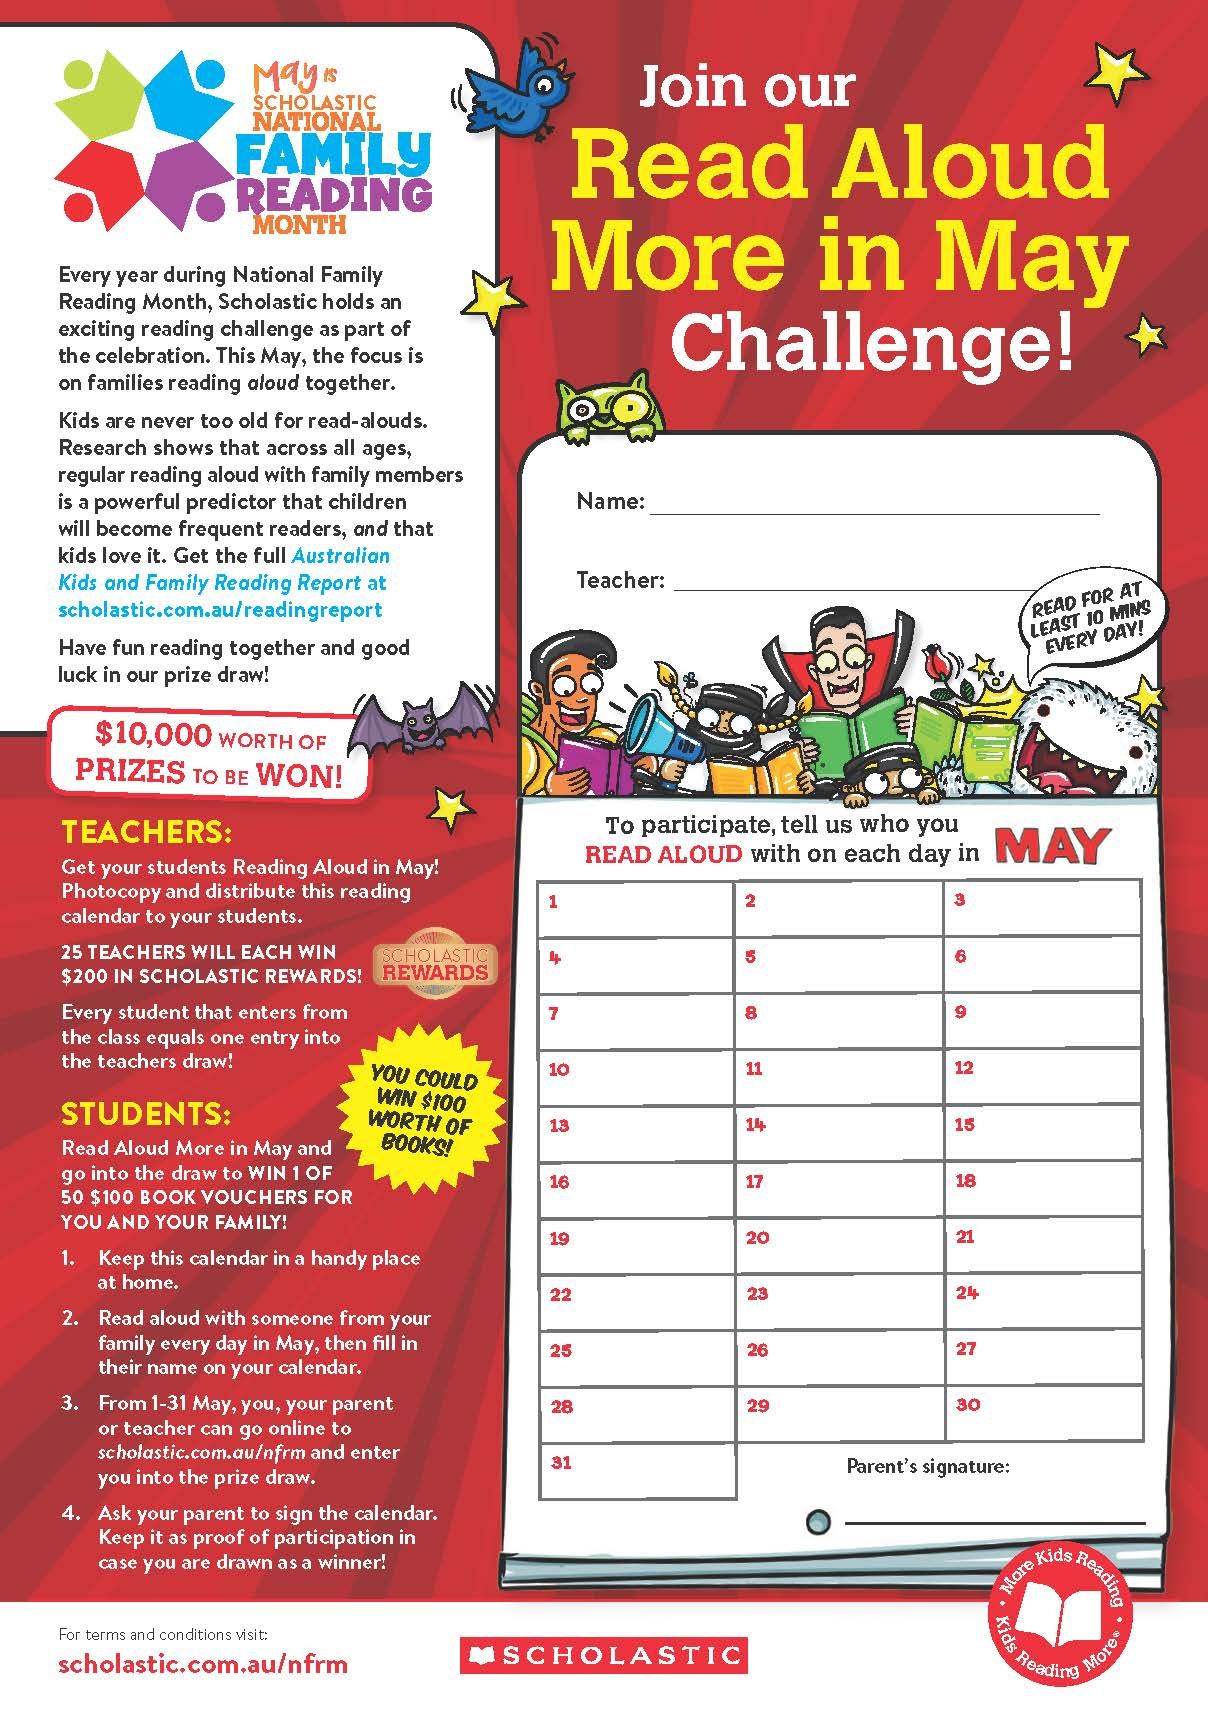 Image result for scholastic national reading challenge